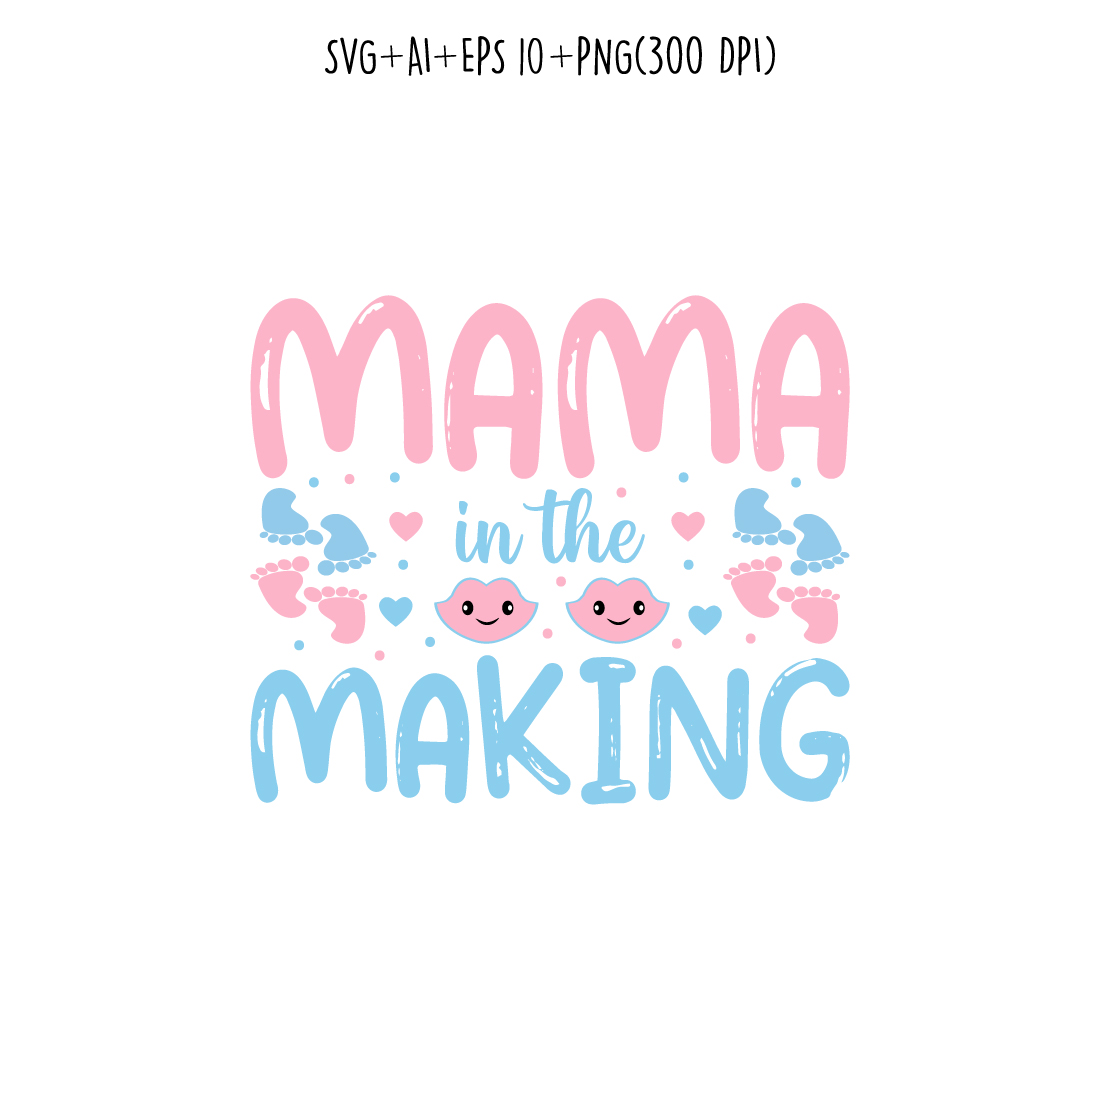 mama in the making pregnancy t-shirt design for t-shirts, cards, frame artwork, phone cases, bags, mugs, stickers, tumblers, print, etc preview image.